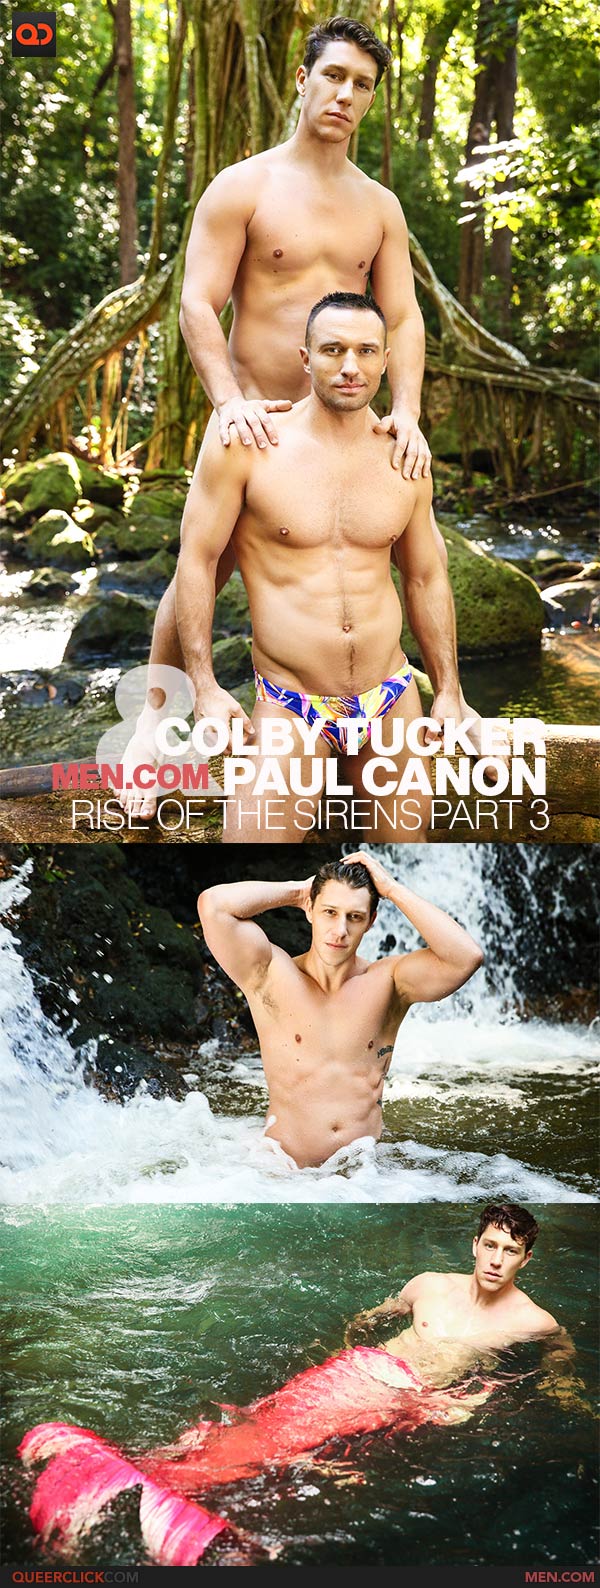 Men.com: Colby Tucker and Paul Canon